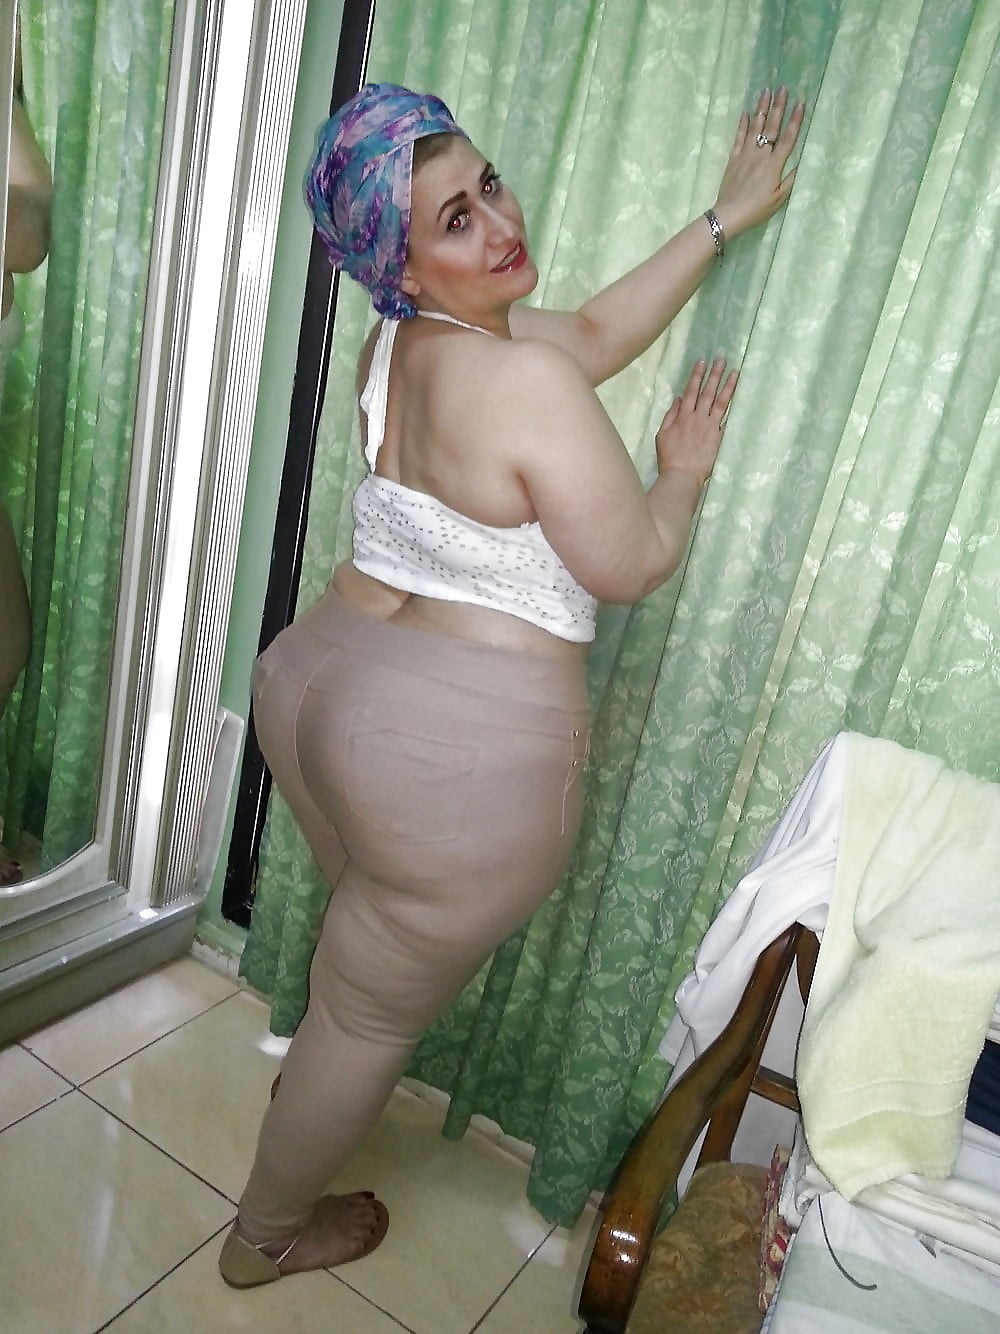 Naked Chubby Muslim - Fat Girl in a Hijab (46 photos) - motherless porn pics